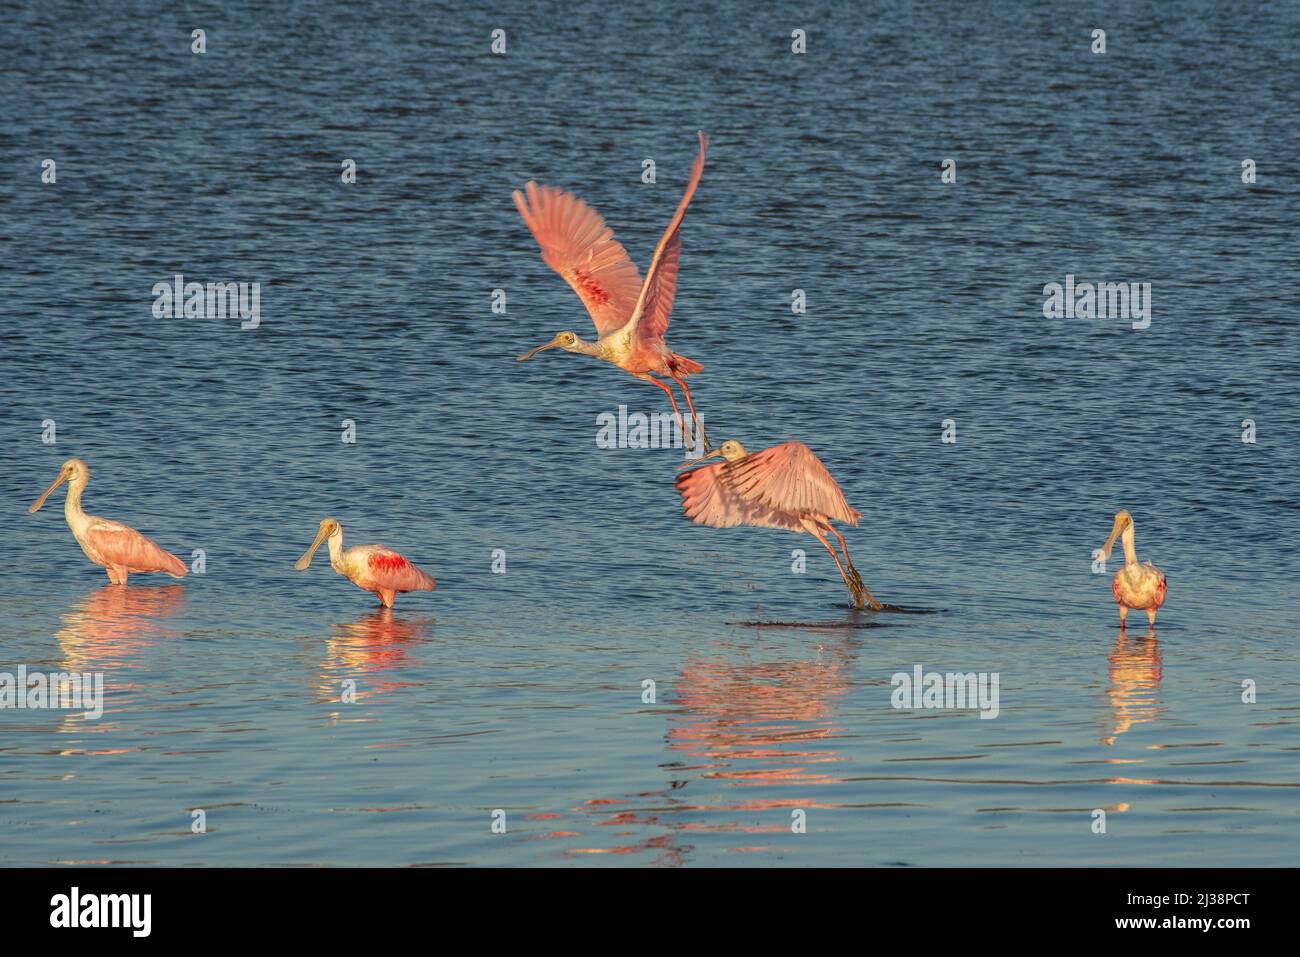 Five roseate spoonbills, two taking off and three wading, in the Estero el Soldado (Estuary of Soldiers) in San Carlos, Sonora, Mexico. Stock Photo